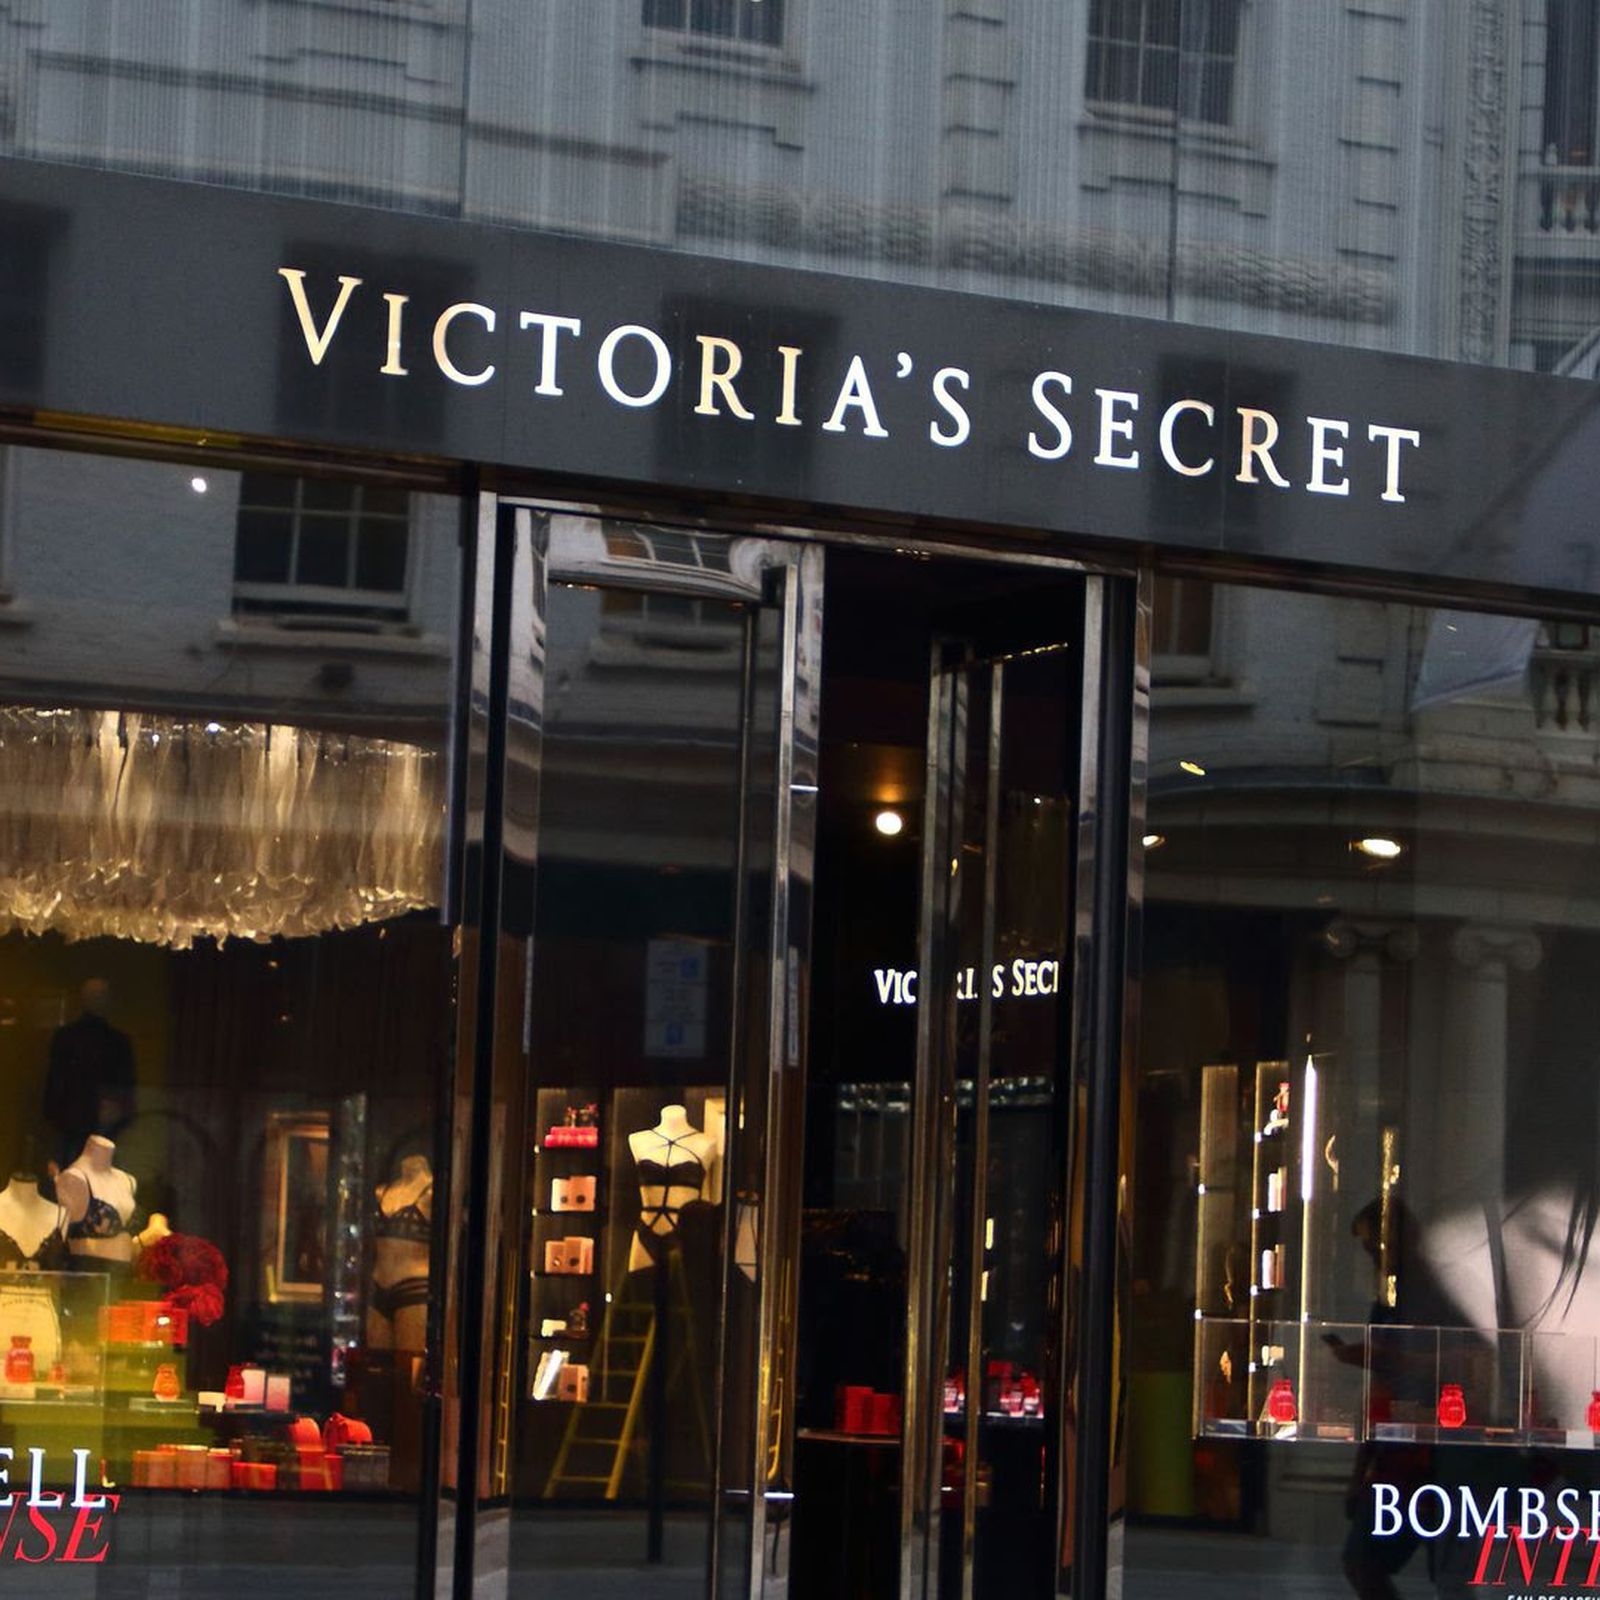 Victoria's Secret Billionaire May Step Down From Company: WSJ, NYT